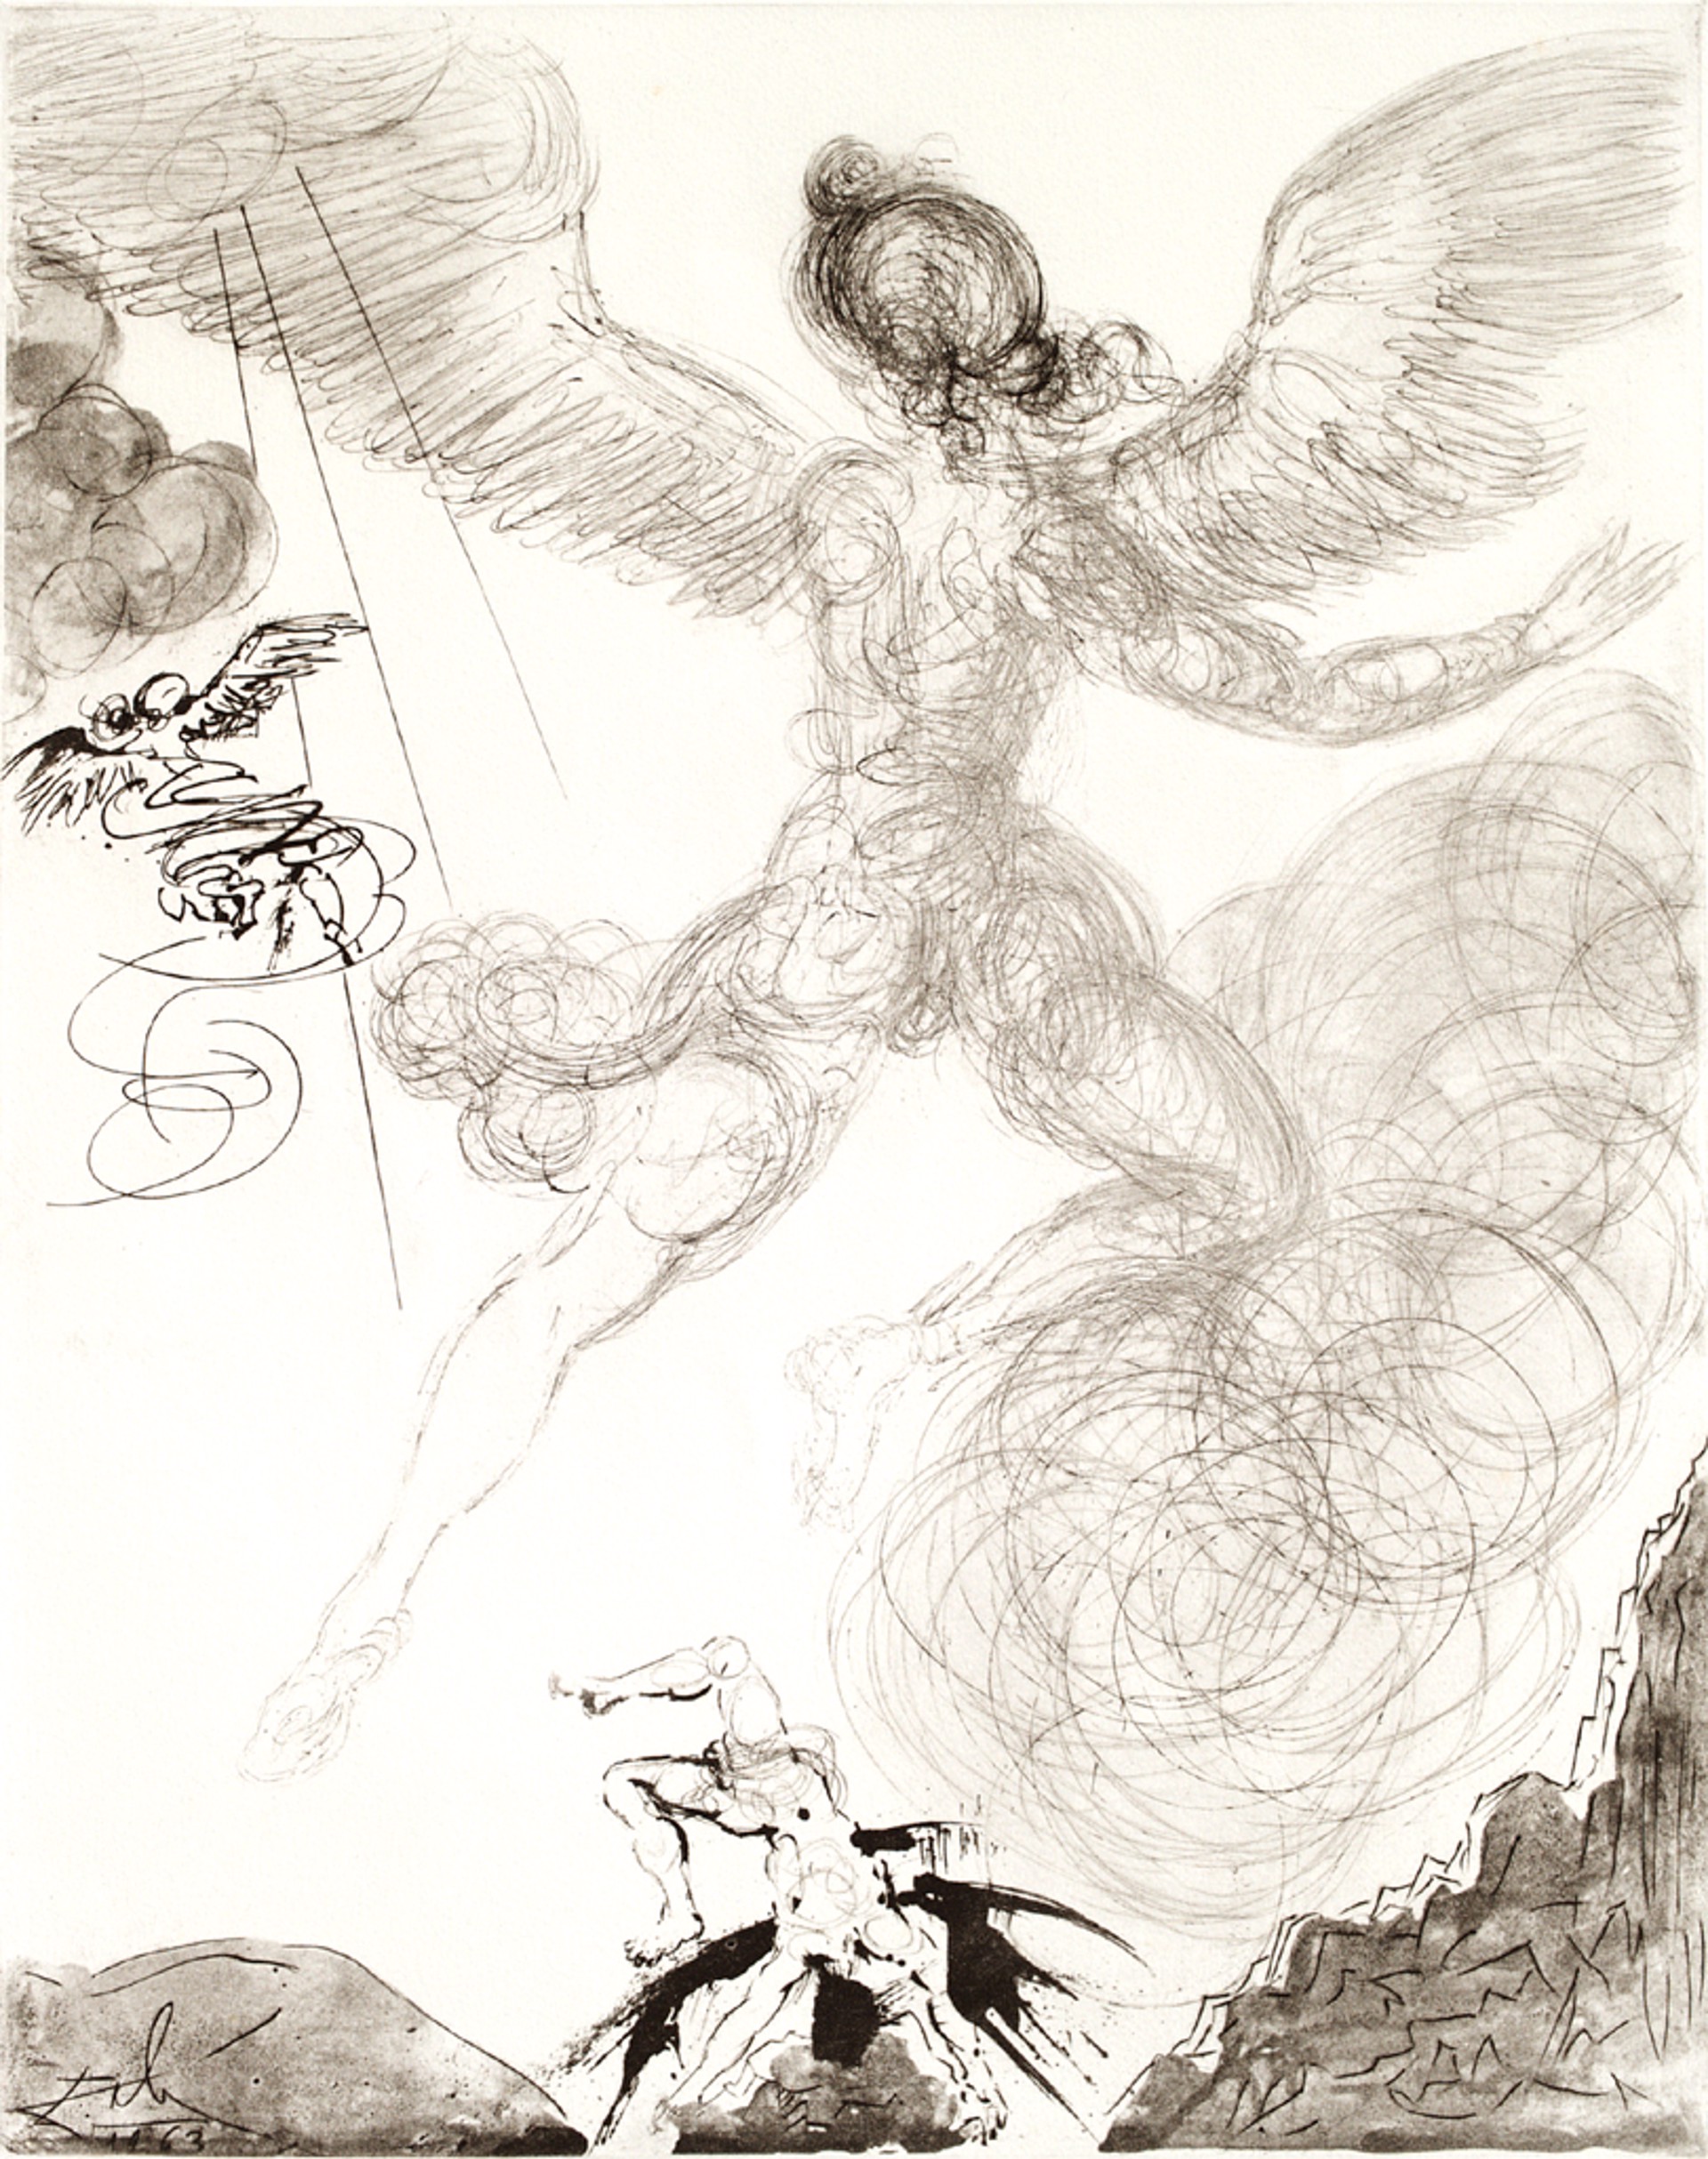 Mythology "Flight and Fall of Icarus" by Salvador Dali